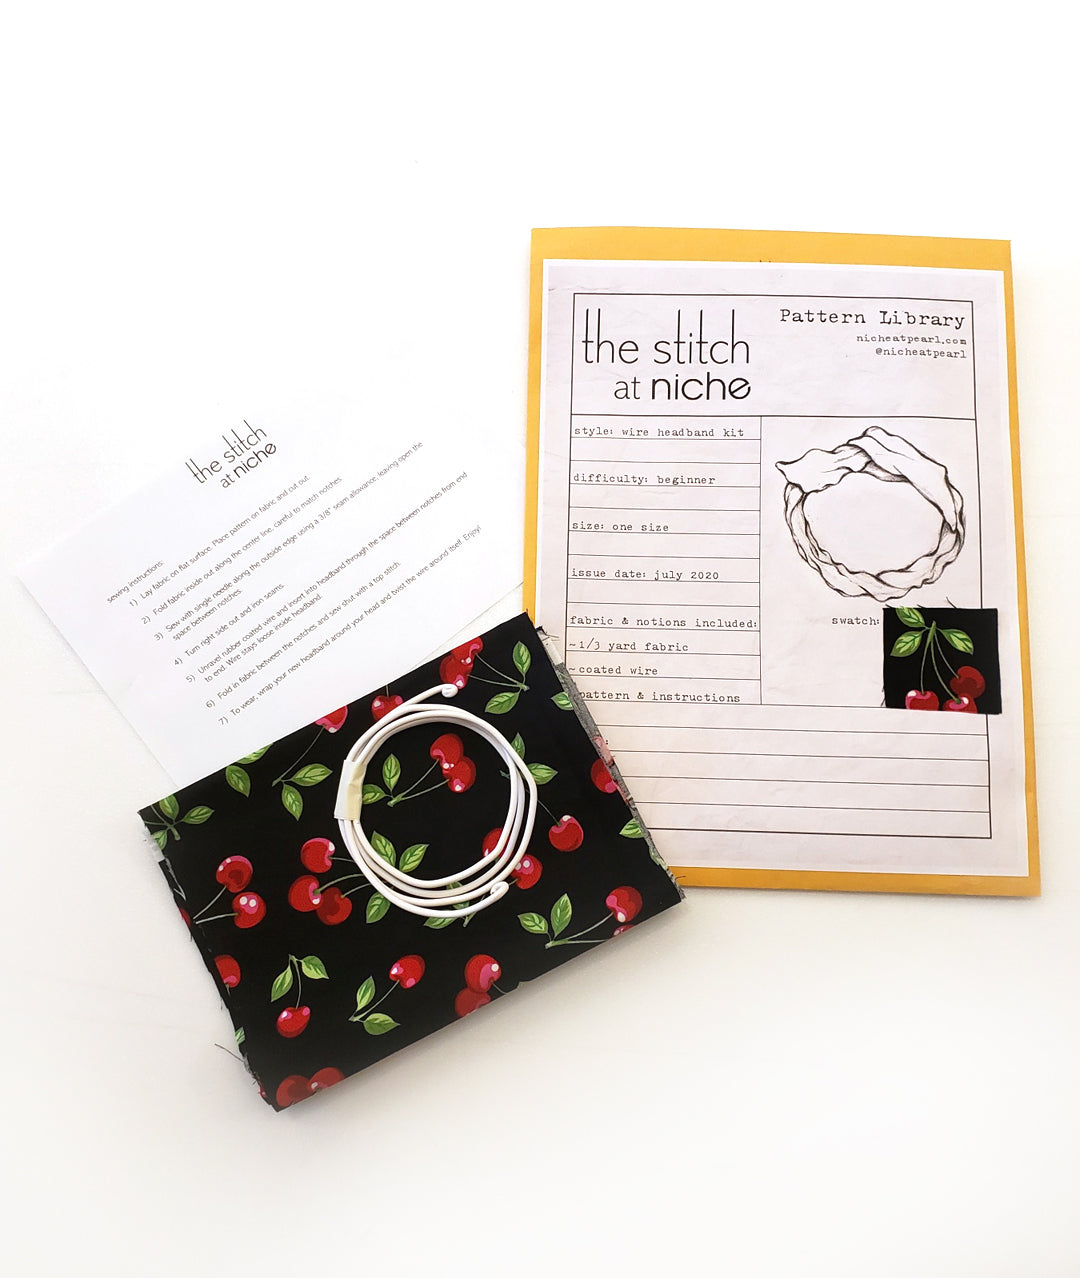 sewing pattern envelope with contents next to it, including a piece of fabric, wire and sewing instructions